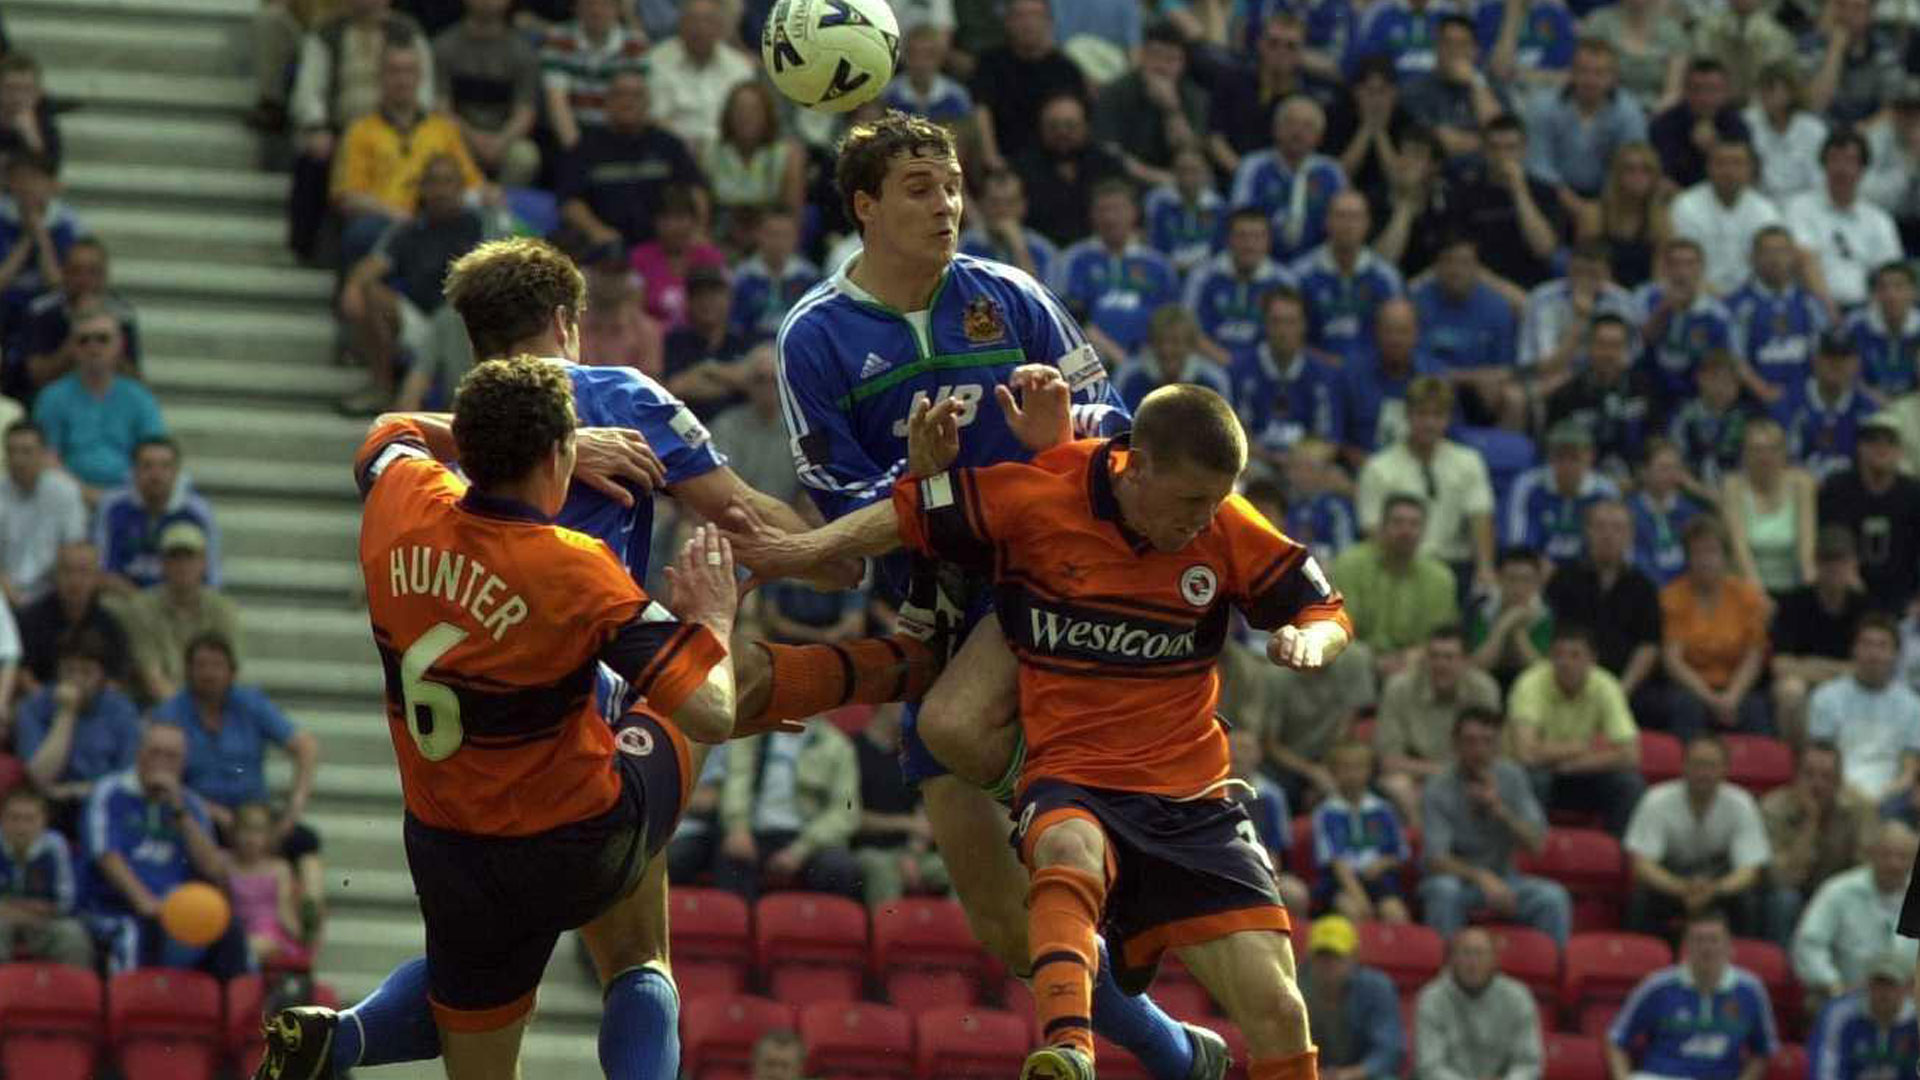 Simon Howarth in action for Wigan Athletic...